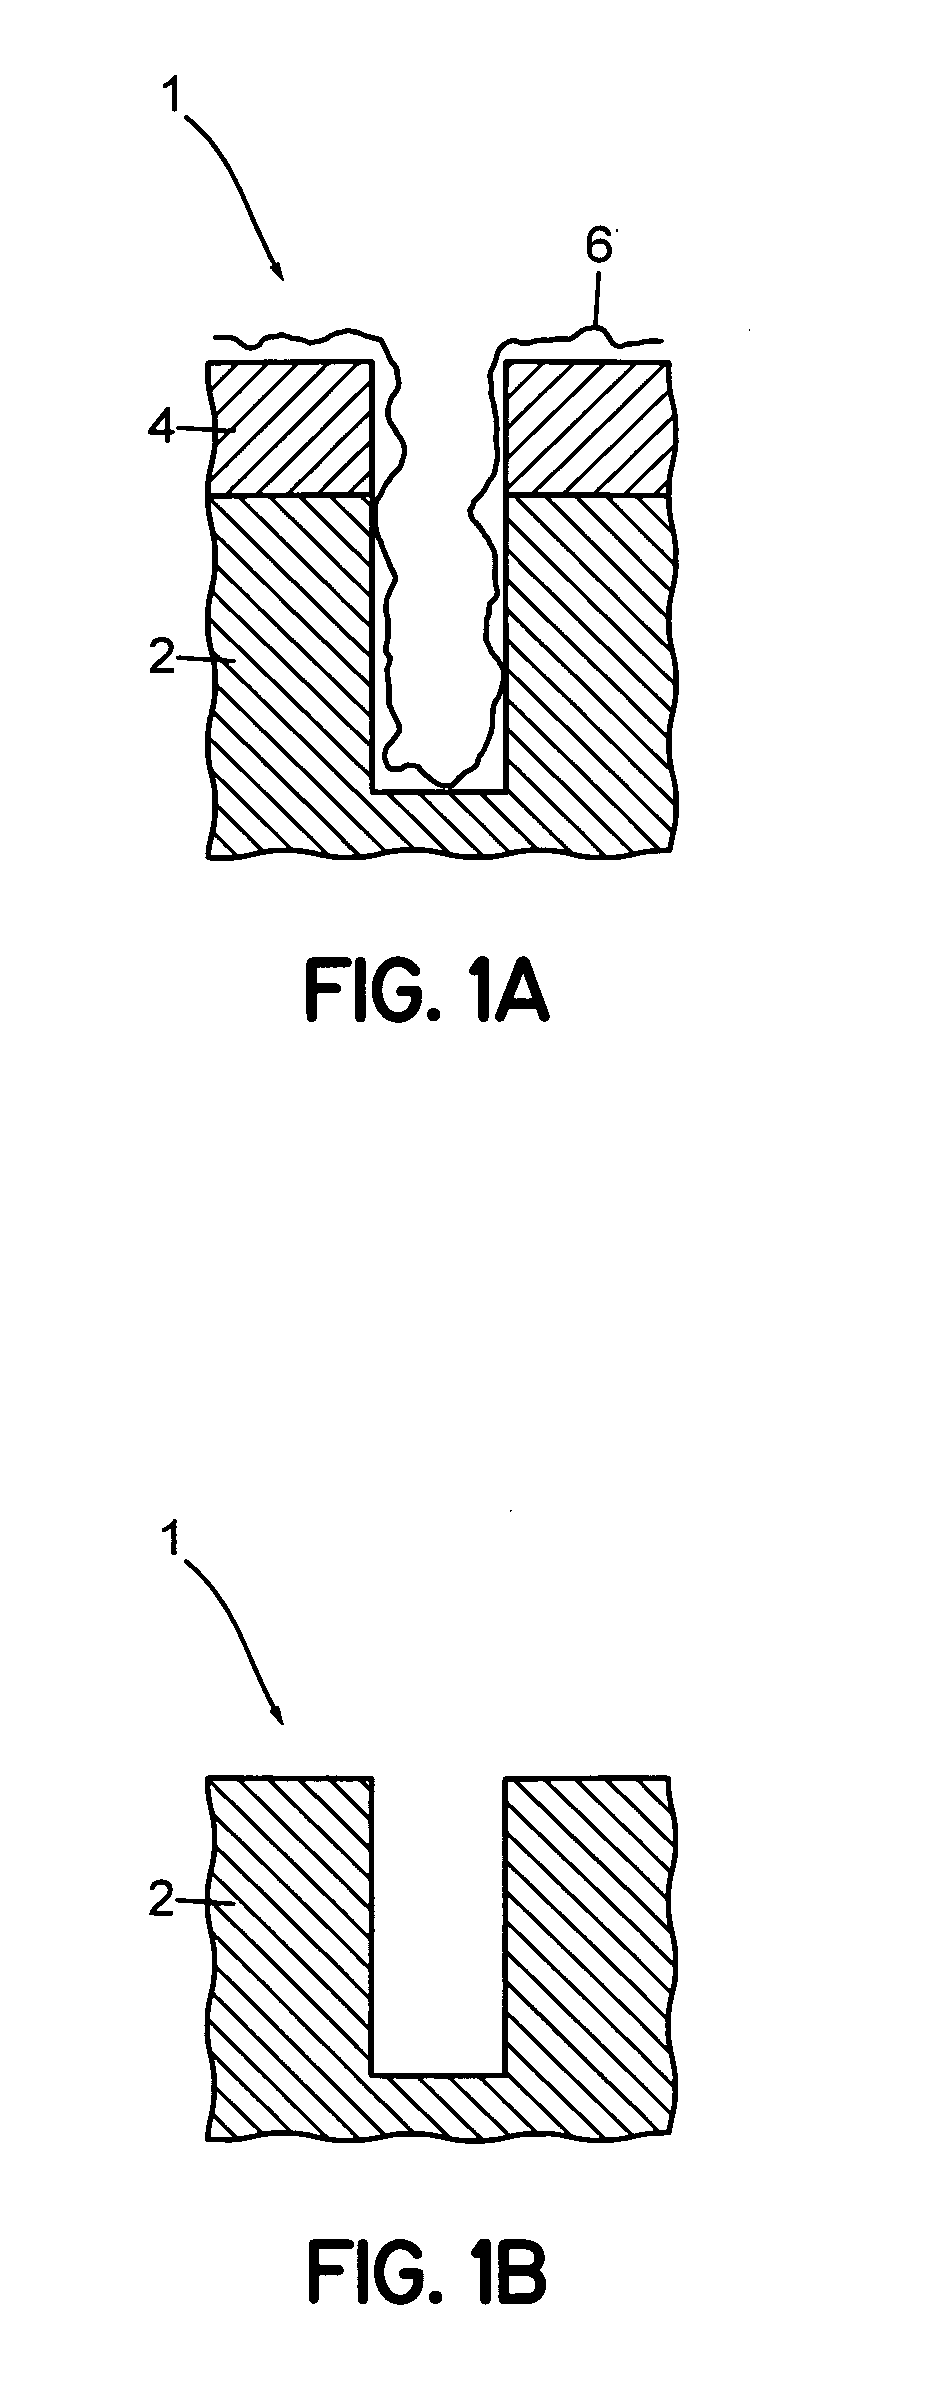 System for removing a residue from a substrate using supercritical carbon dioxide processing